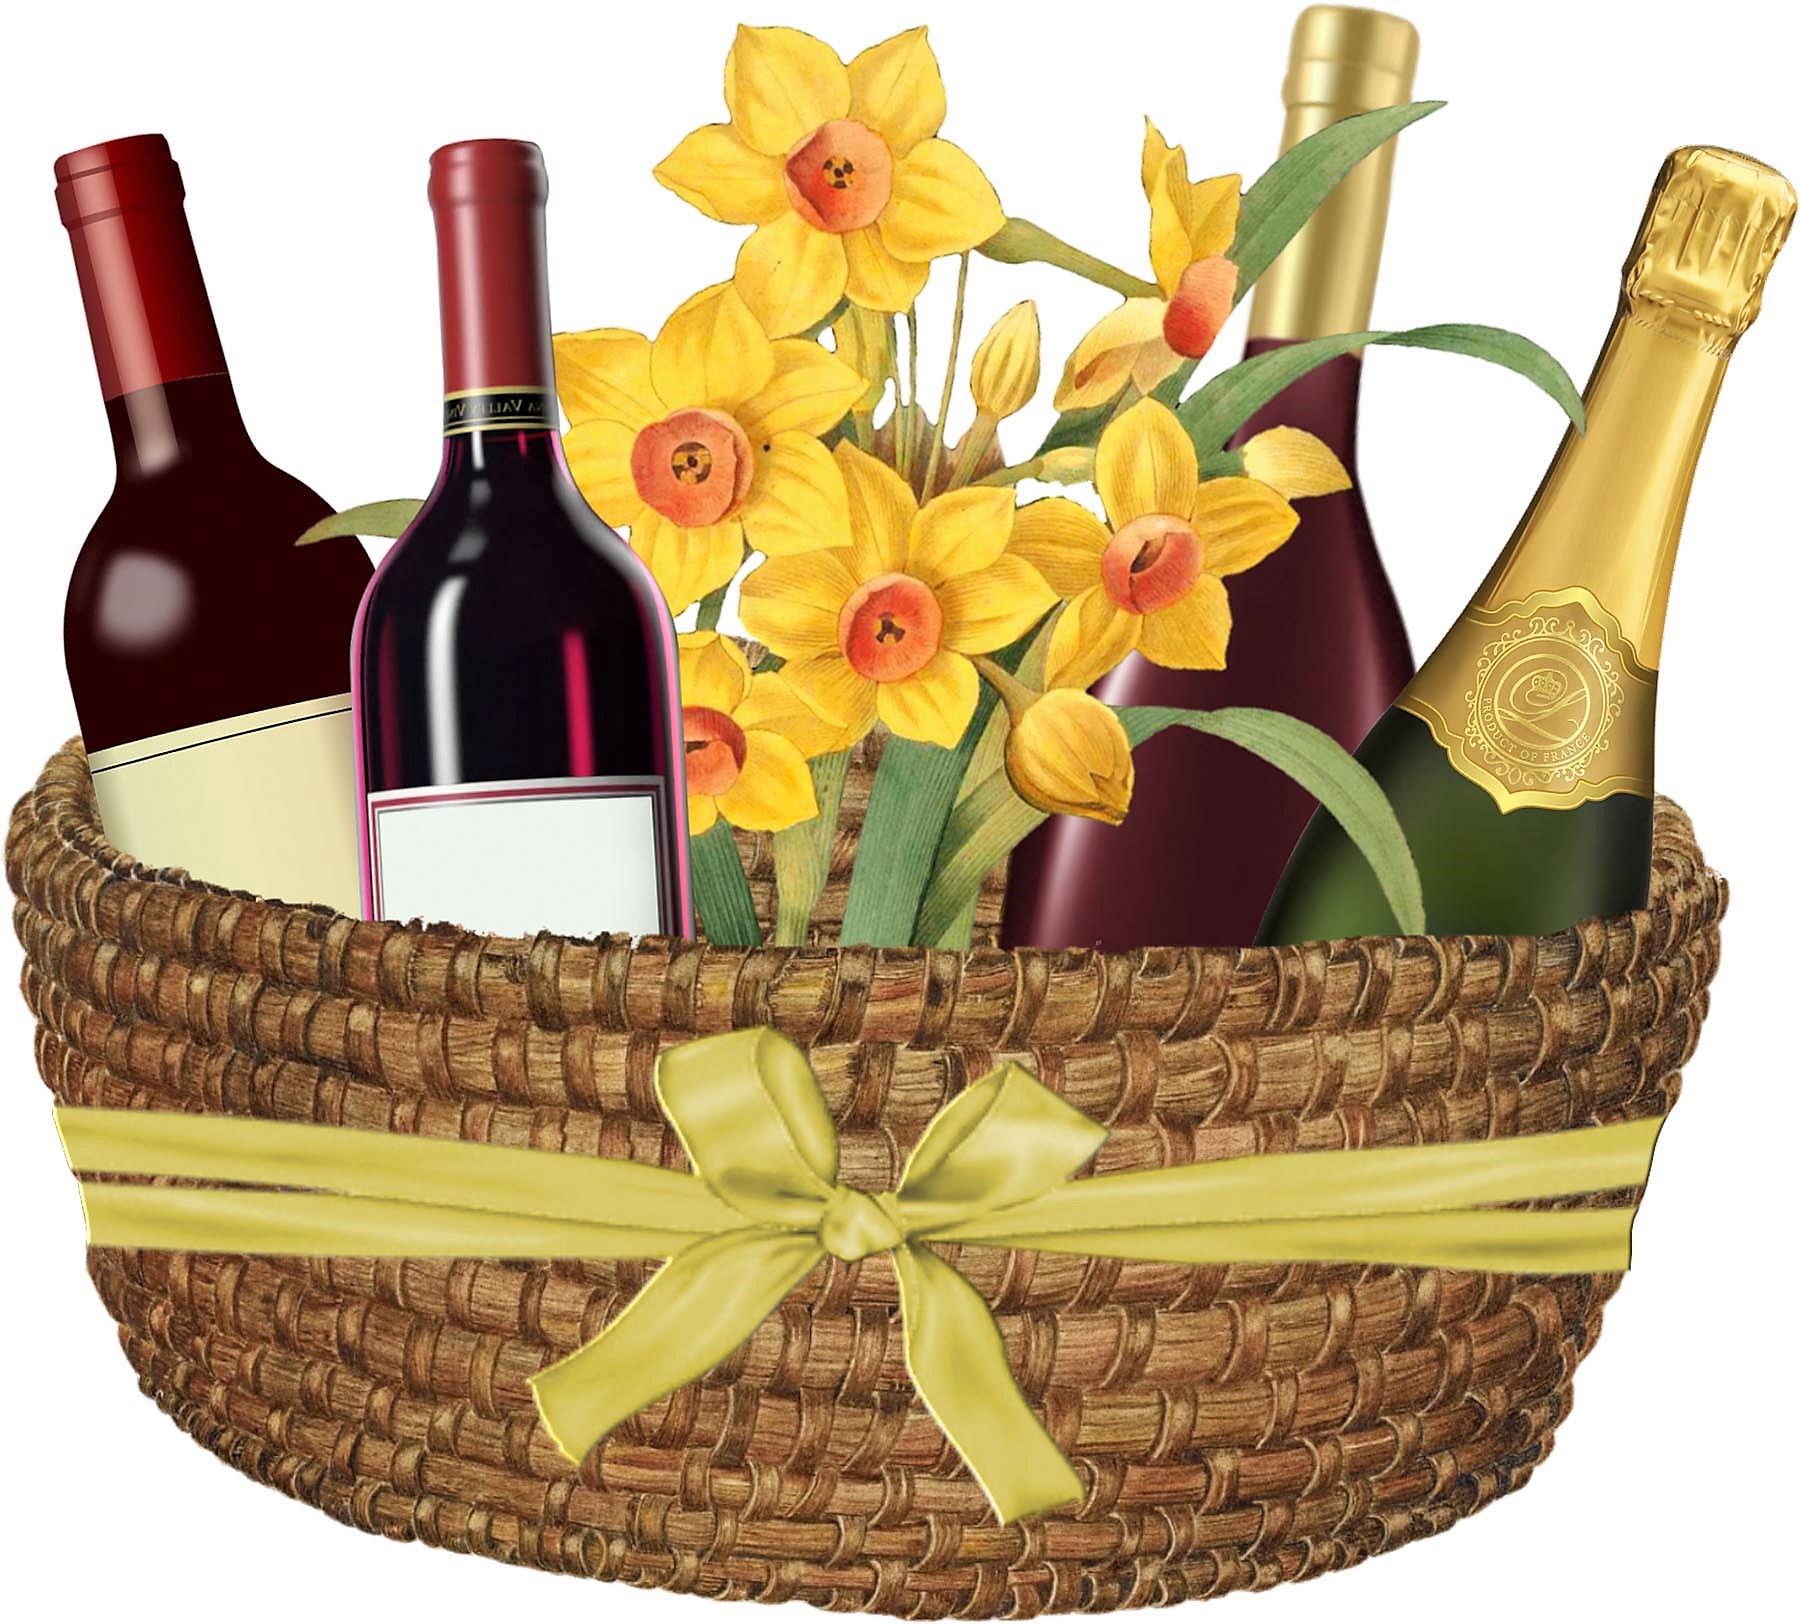 Mother's Day Wines